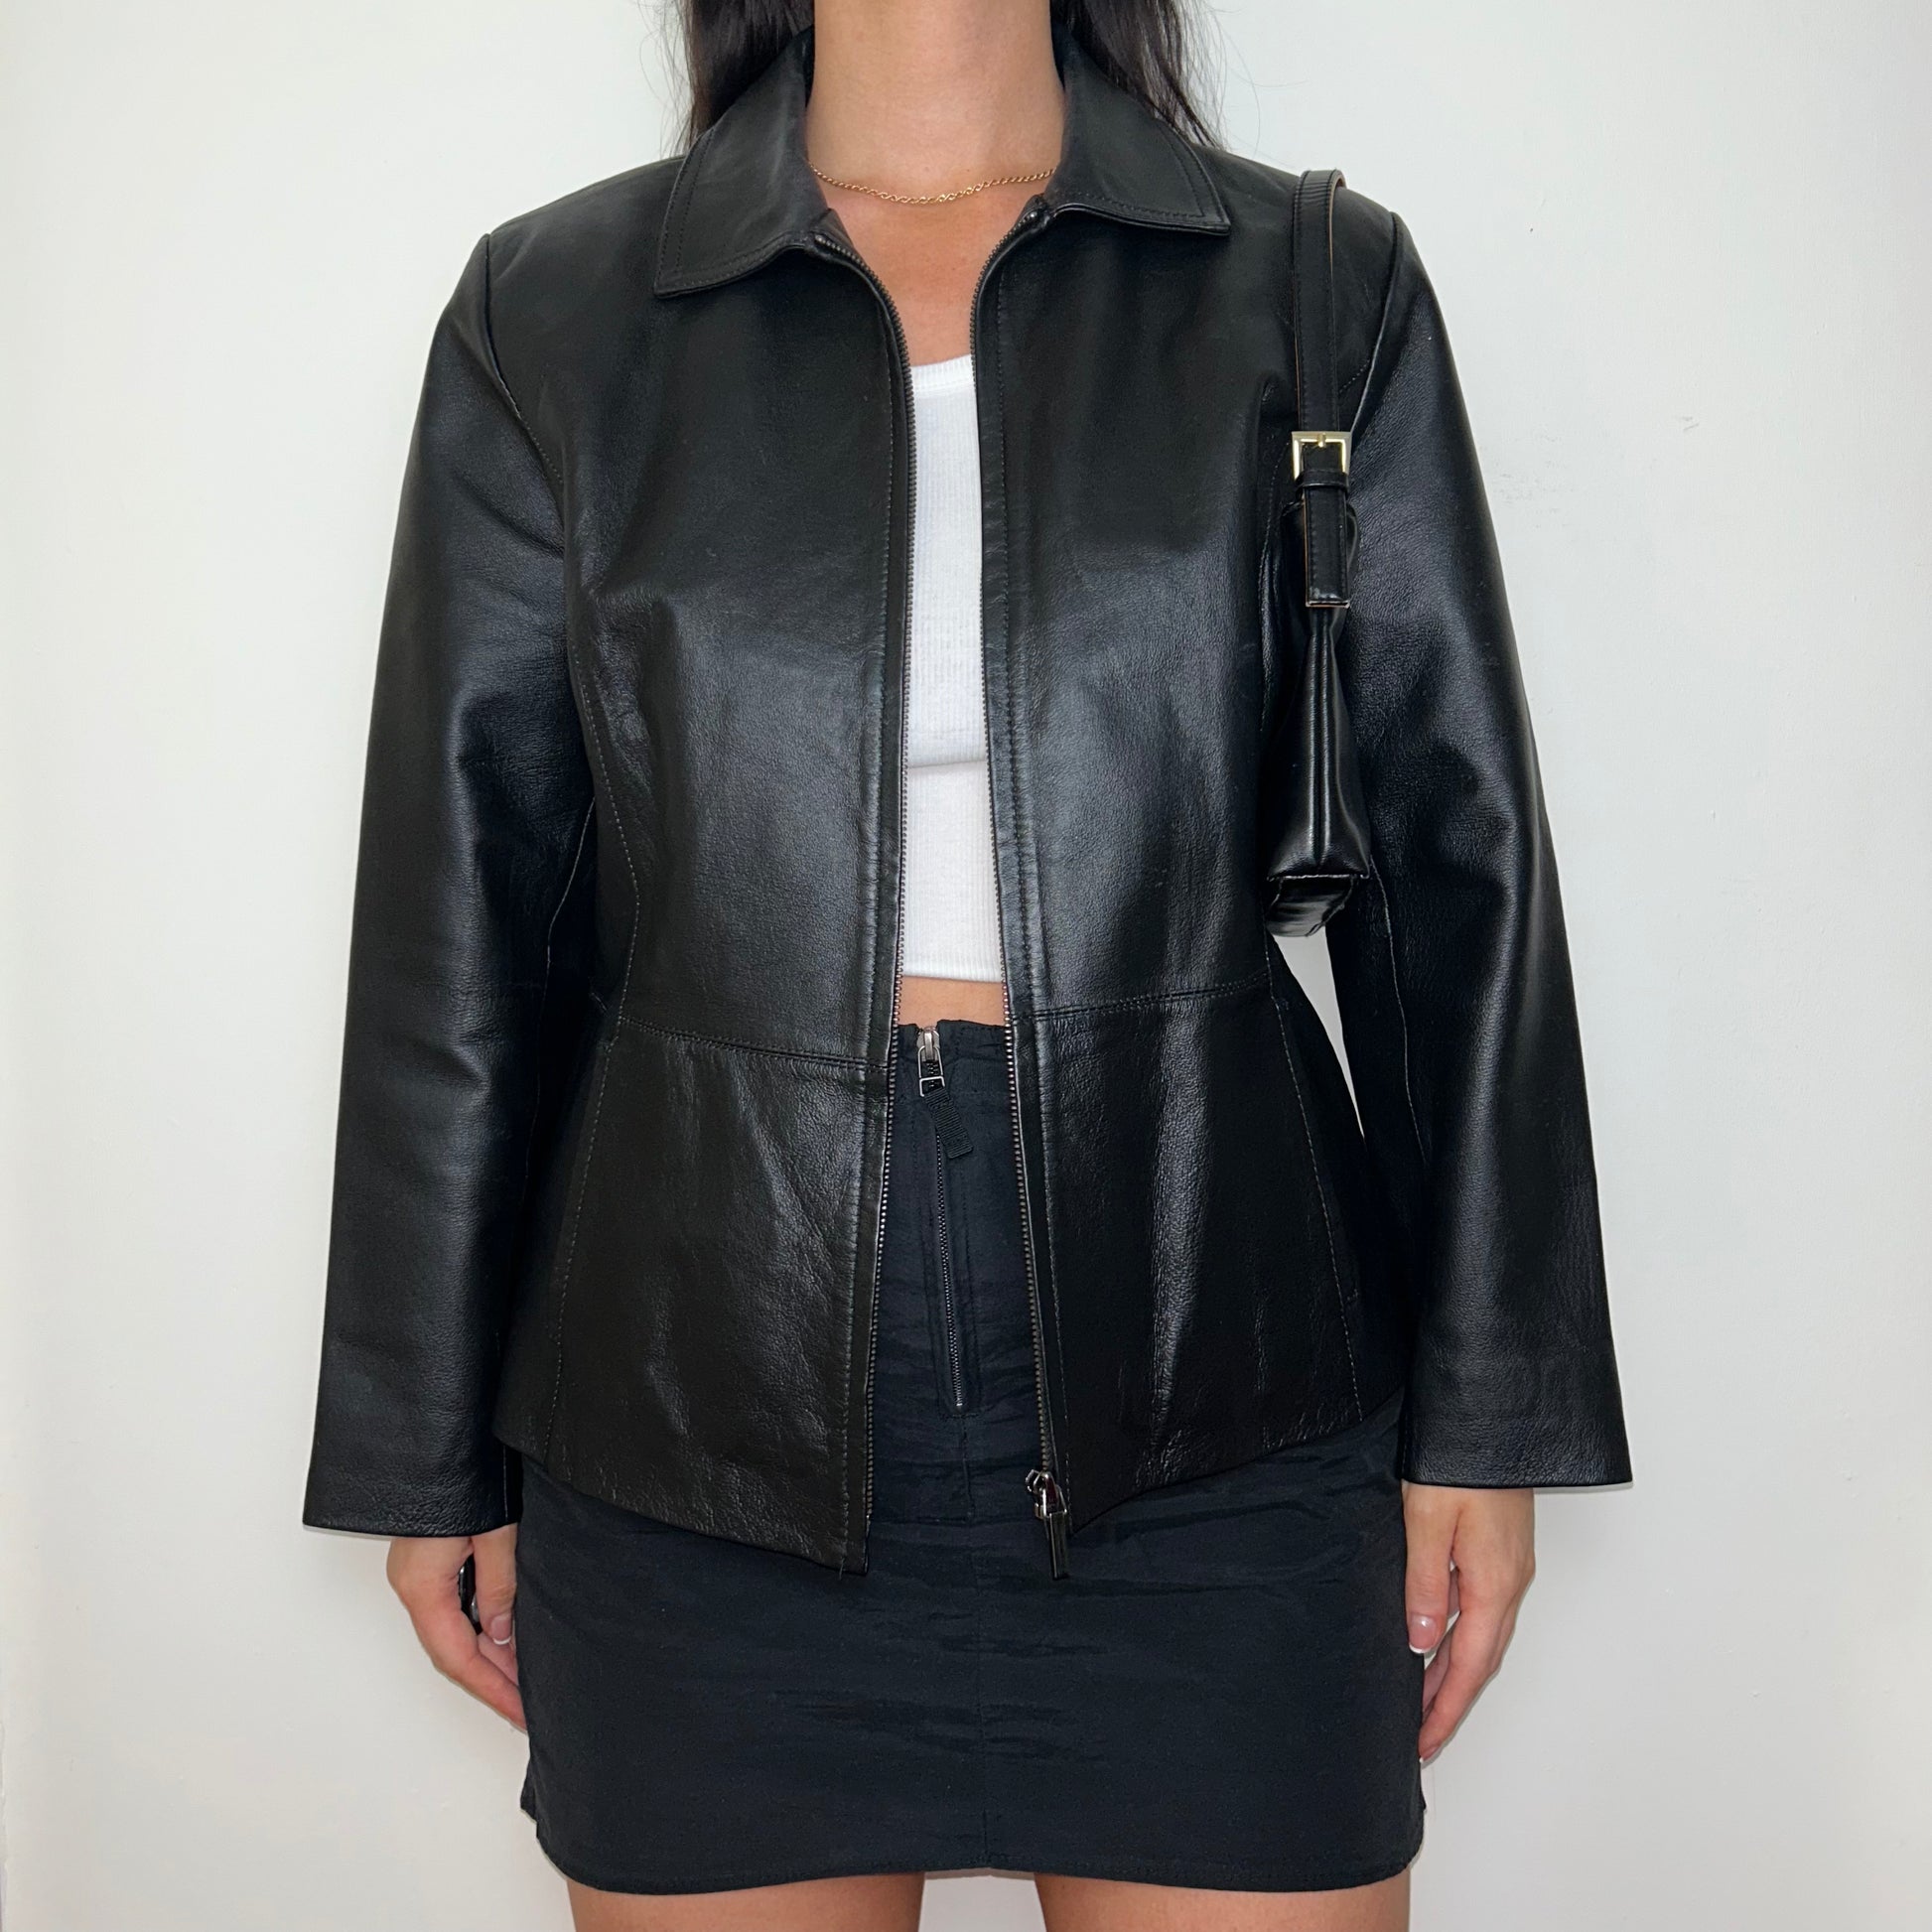 black zip up bomber jacket shown on a model wearing a white crop top and black mini skirt and black shoulder bag